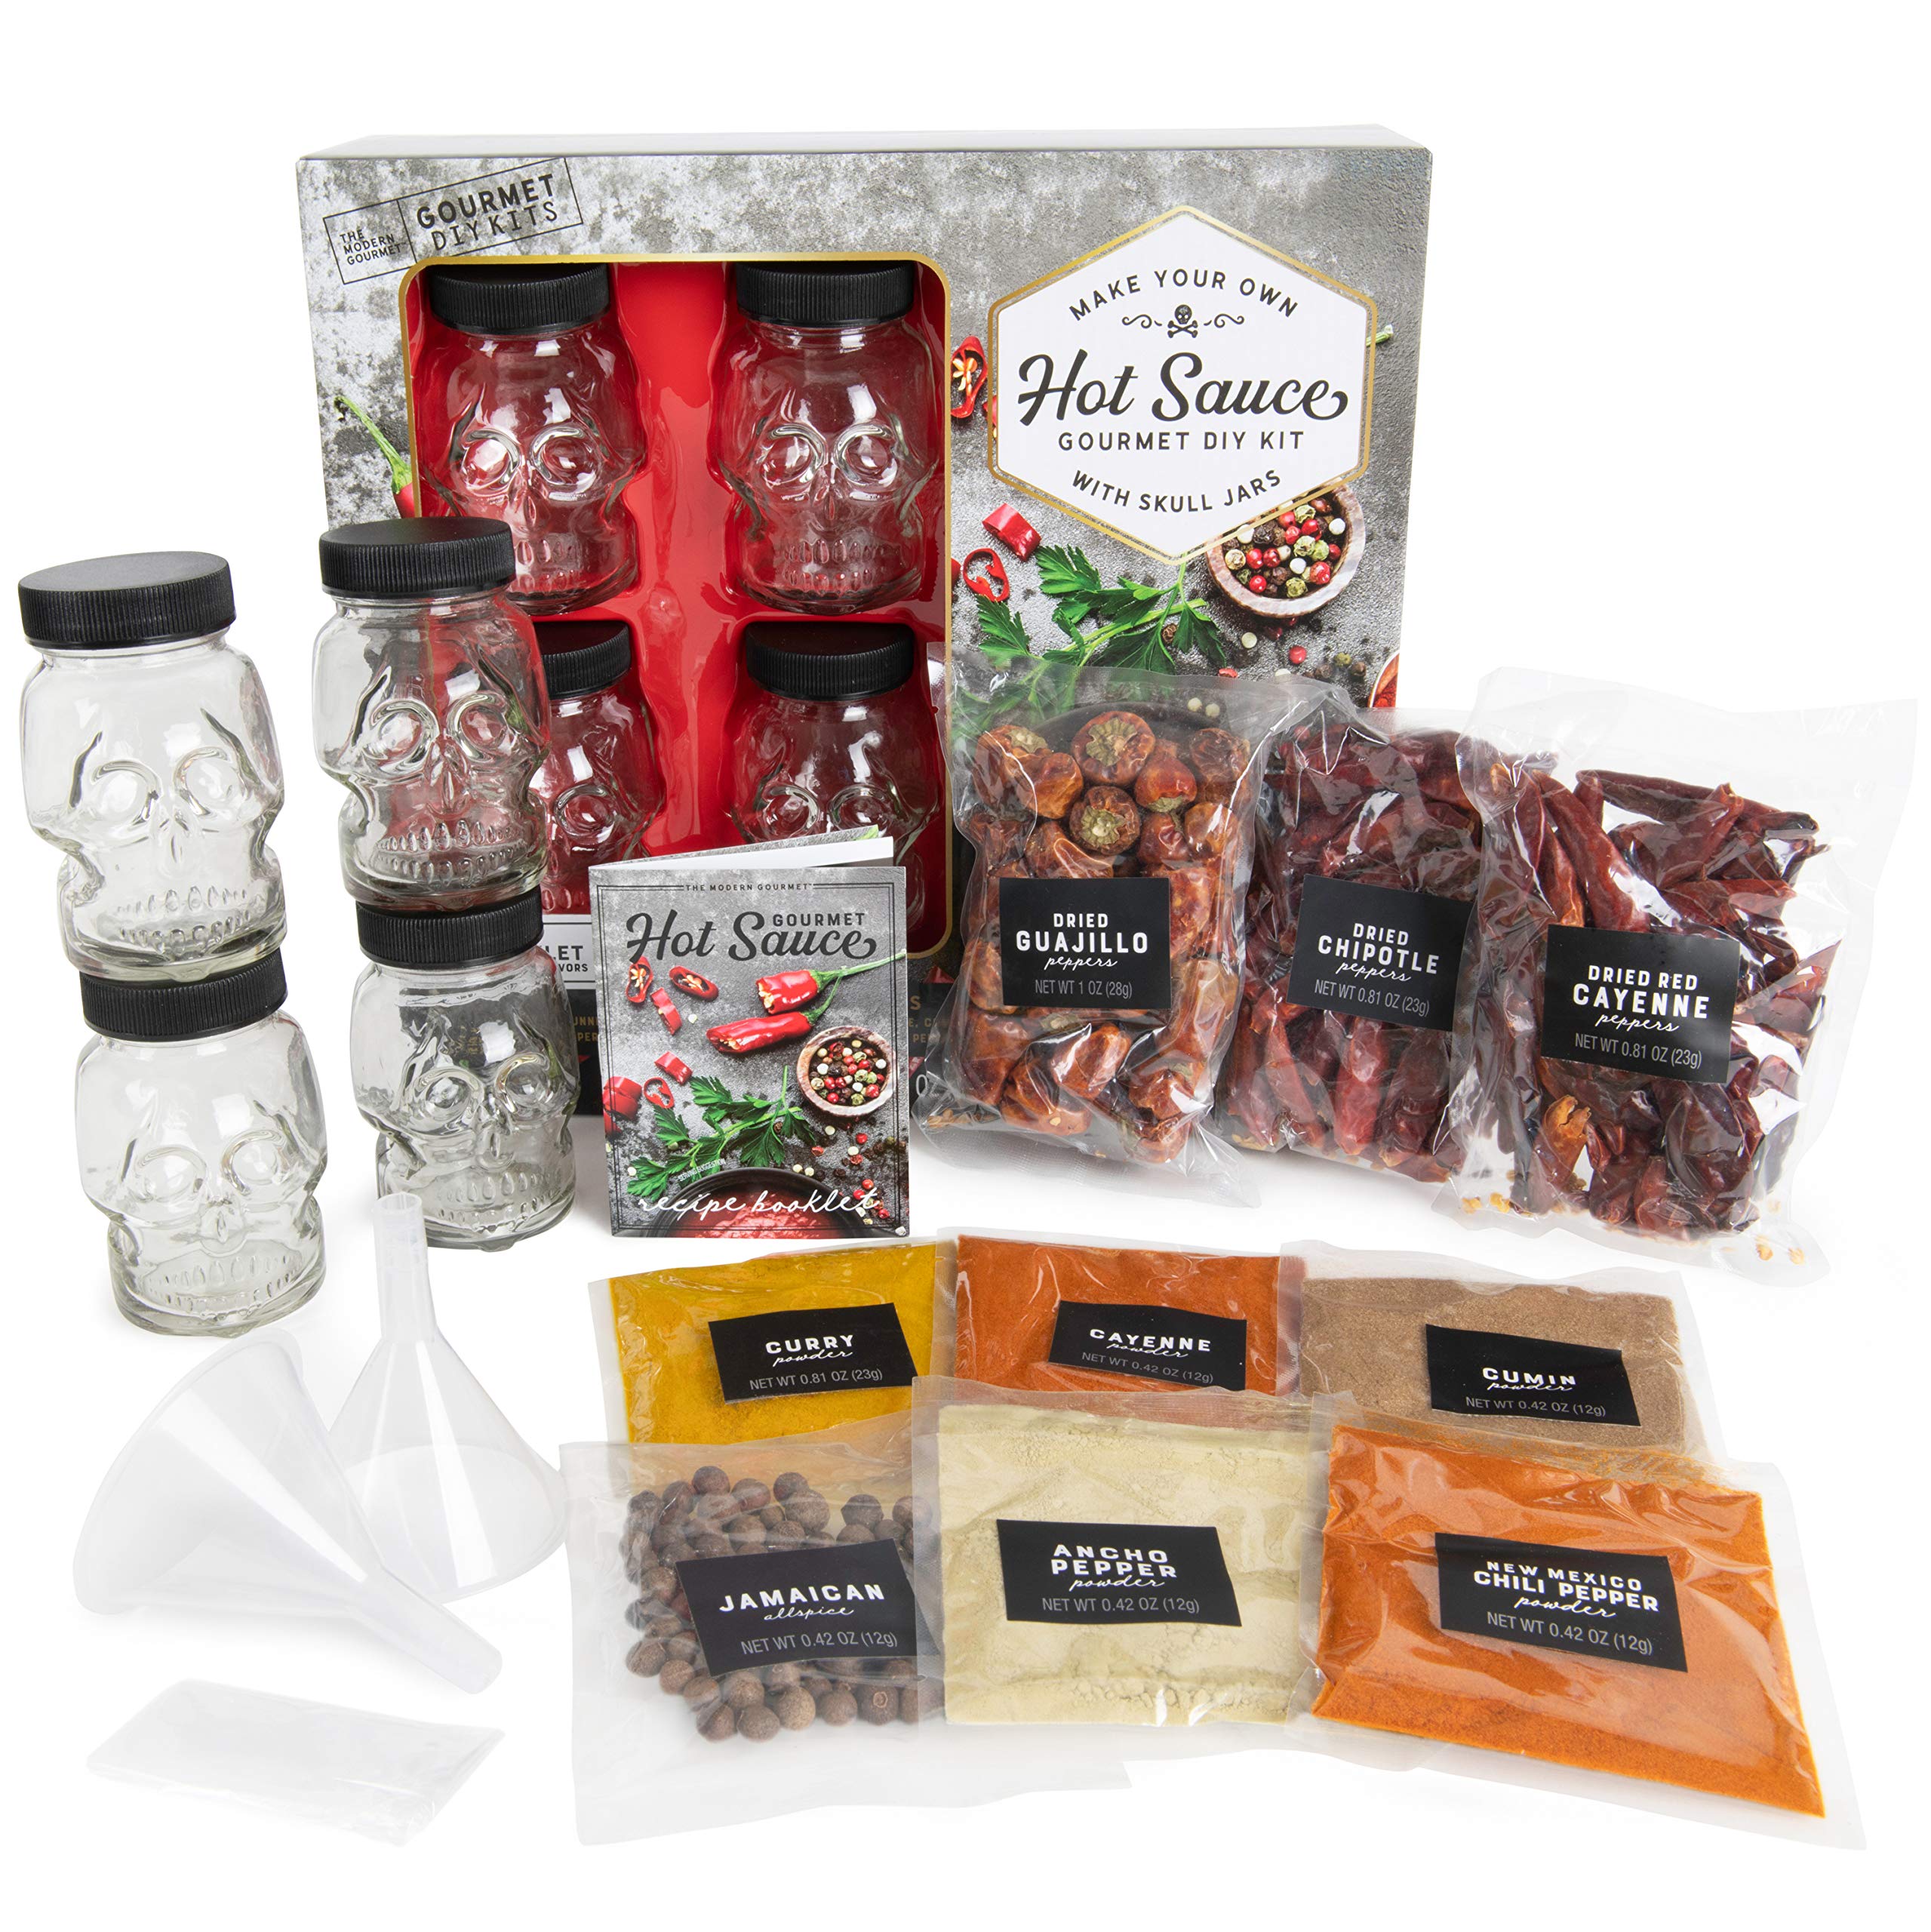 Thoughtfully Gourmet DIY Hot Sauce Set Hot Sauce Making Kit Includes 4  Skull Shaped Reusable Glass Jars 2 Funnels Seasonings Gloves and Recipe  Book to Make Your Own Hot Sauce